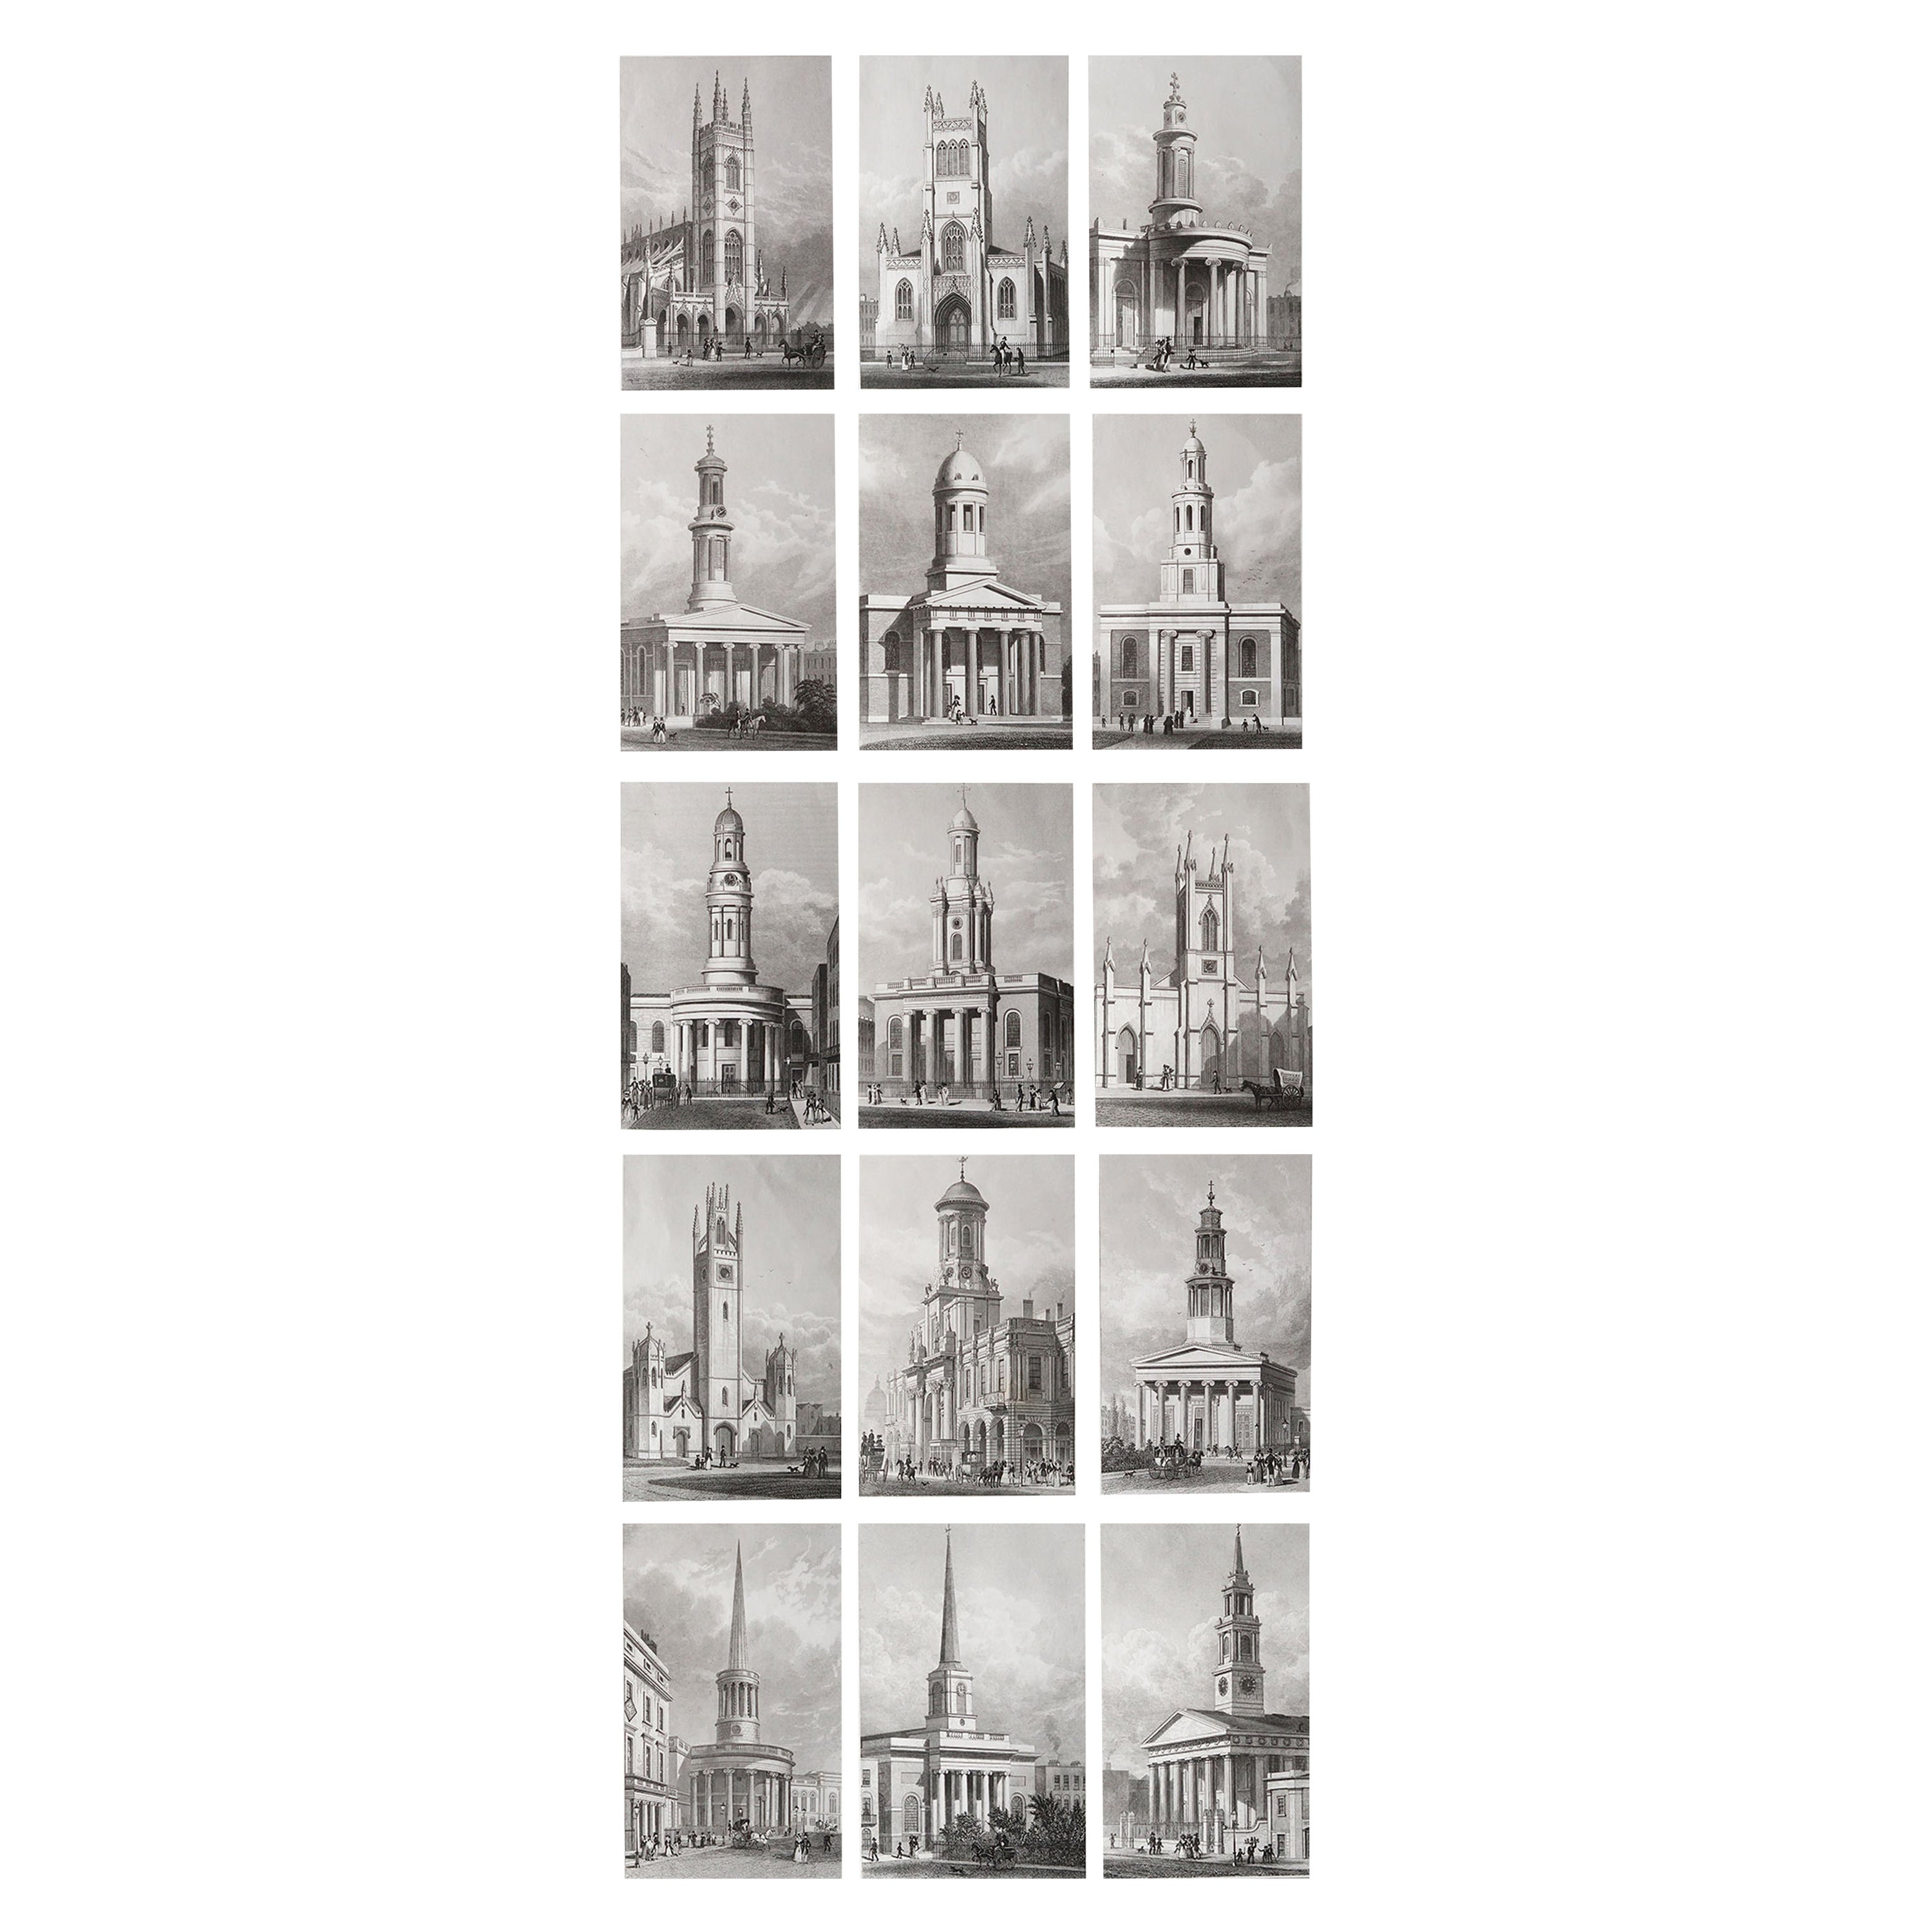 Set of 15 Antique Architectural Prints of London Churches, 1828